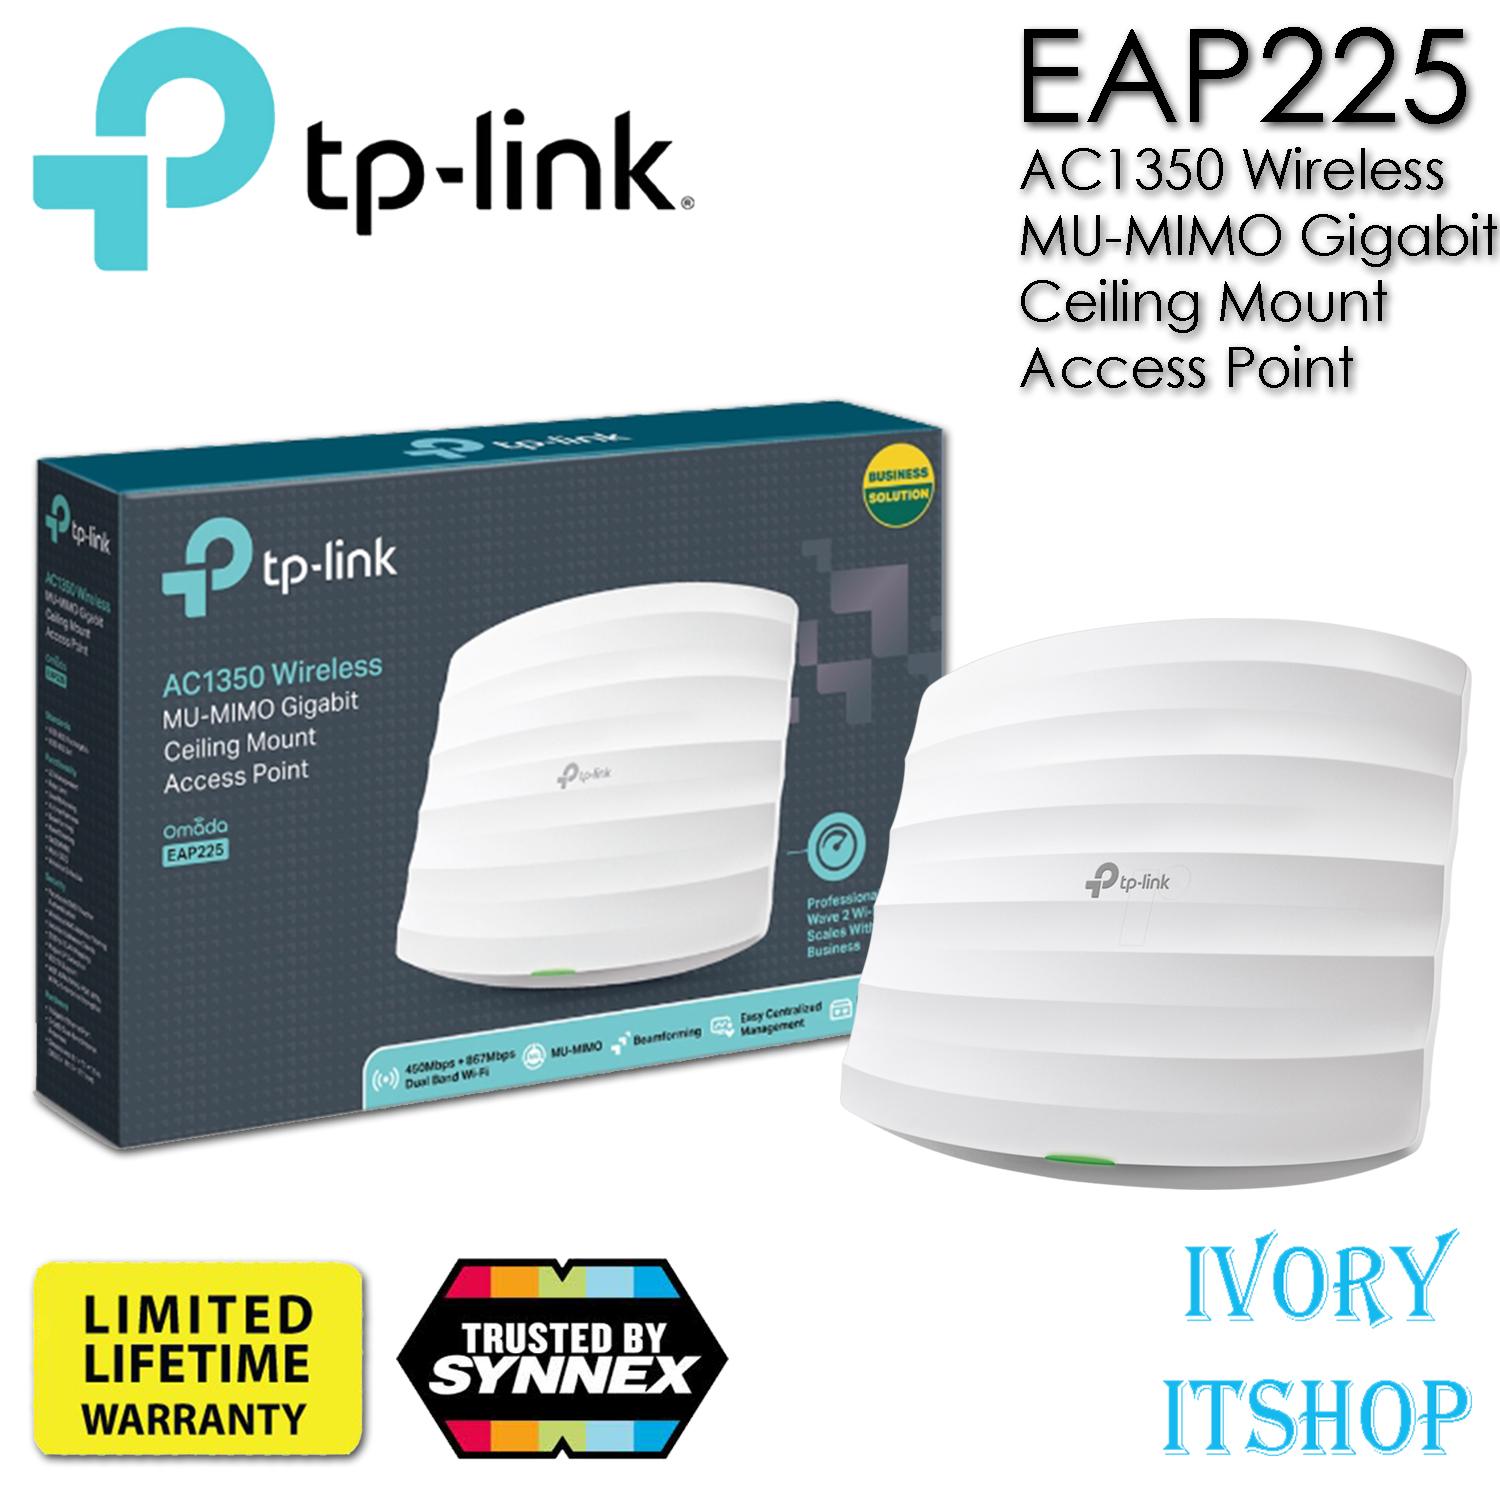 TP-Link EAP225 V3 Access Point  (AC1350 Wireless MU-MIMO Gigabit Ceiling Mount Access Point) EAP 225 /ivoryitshop